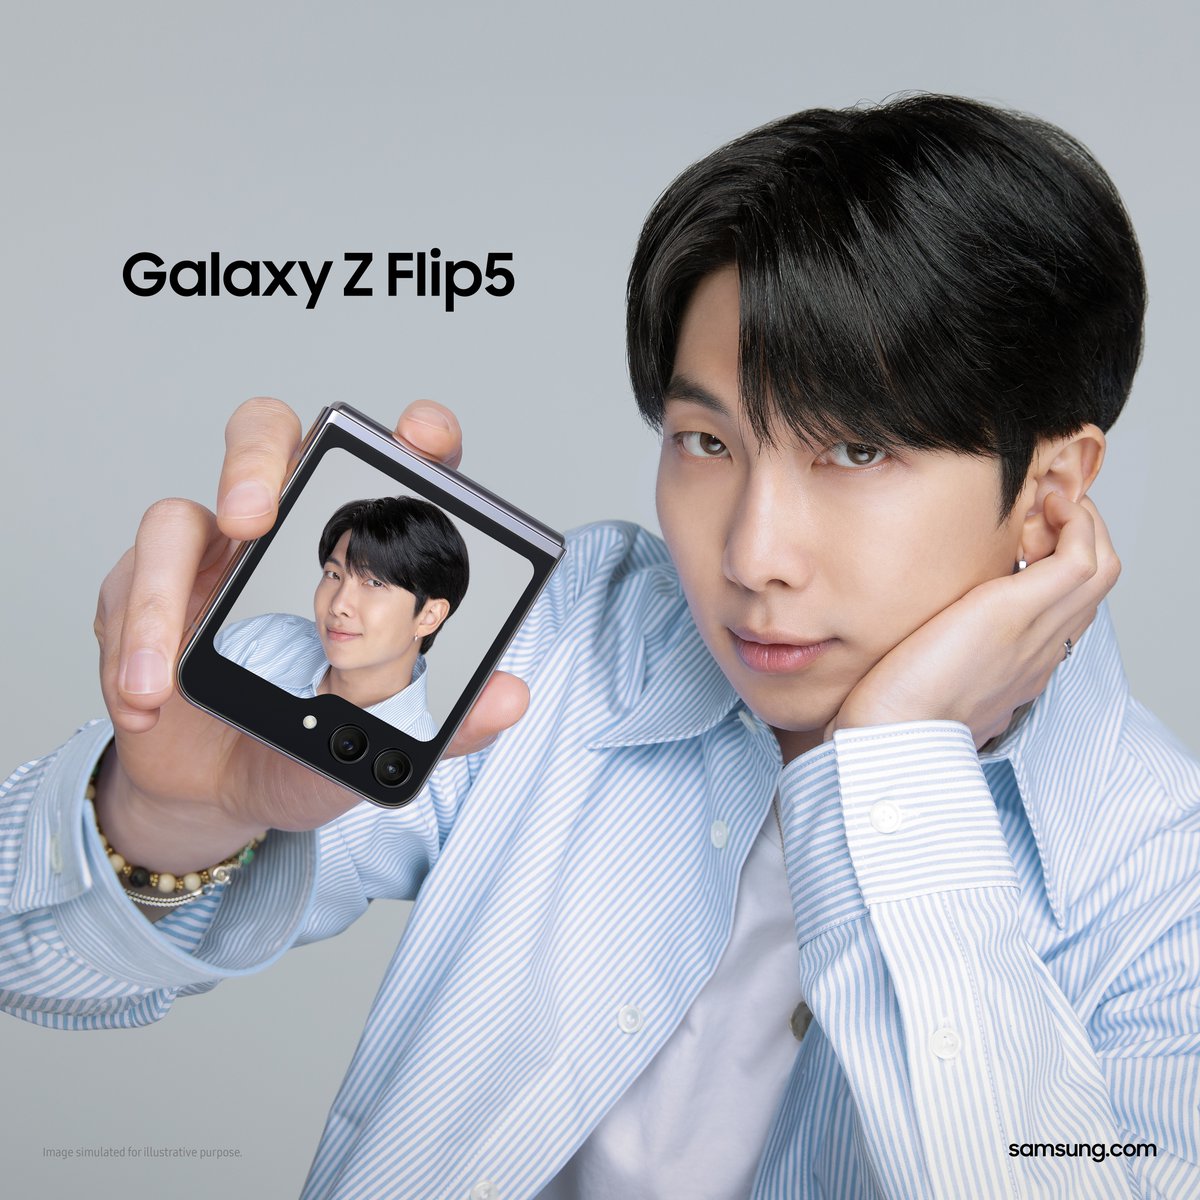 The best selfie quality with upgraded Flex Window for the best leader, #RM of @BTS_twt #GalaxyxRM #GalaxyZFlip5 #JoinTheFlipSide #SamsungUnpacked Learn more: smsng.co/RM_Selfie_tw